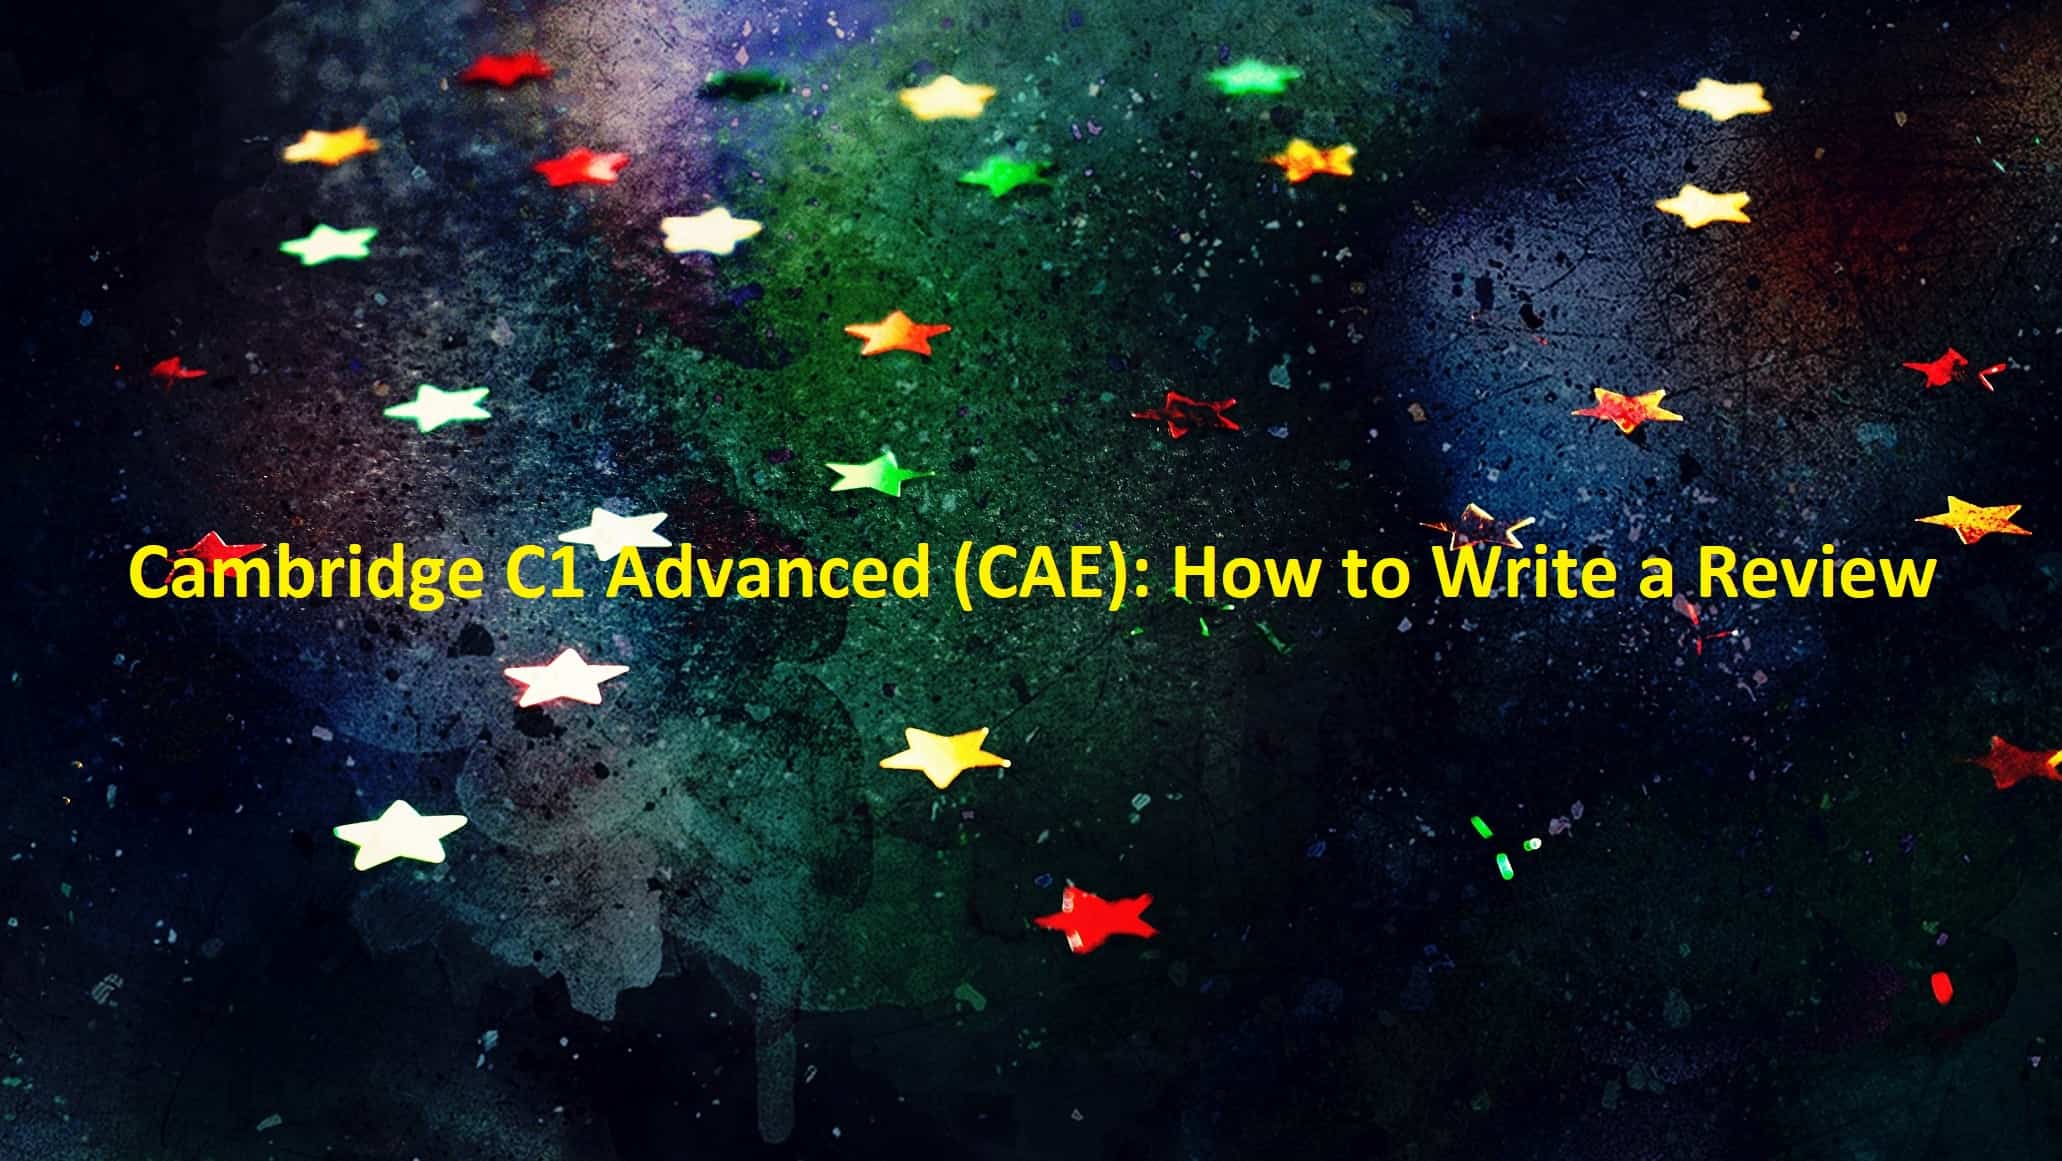 C1 Advanced - How to Write a Review